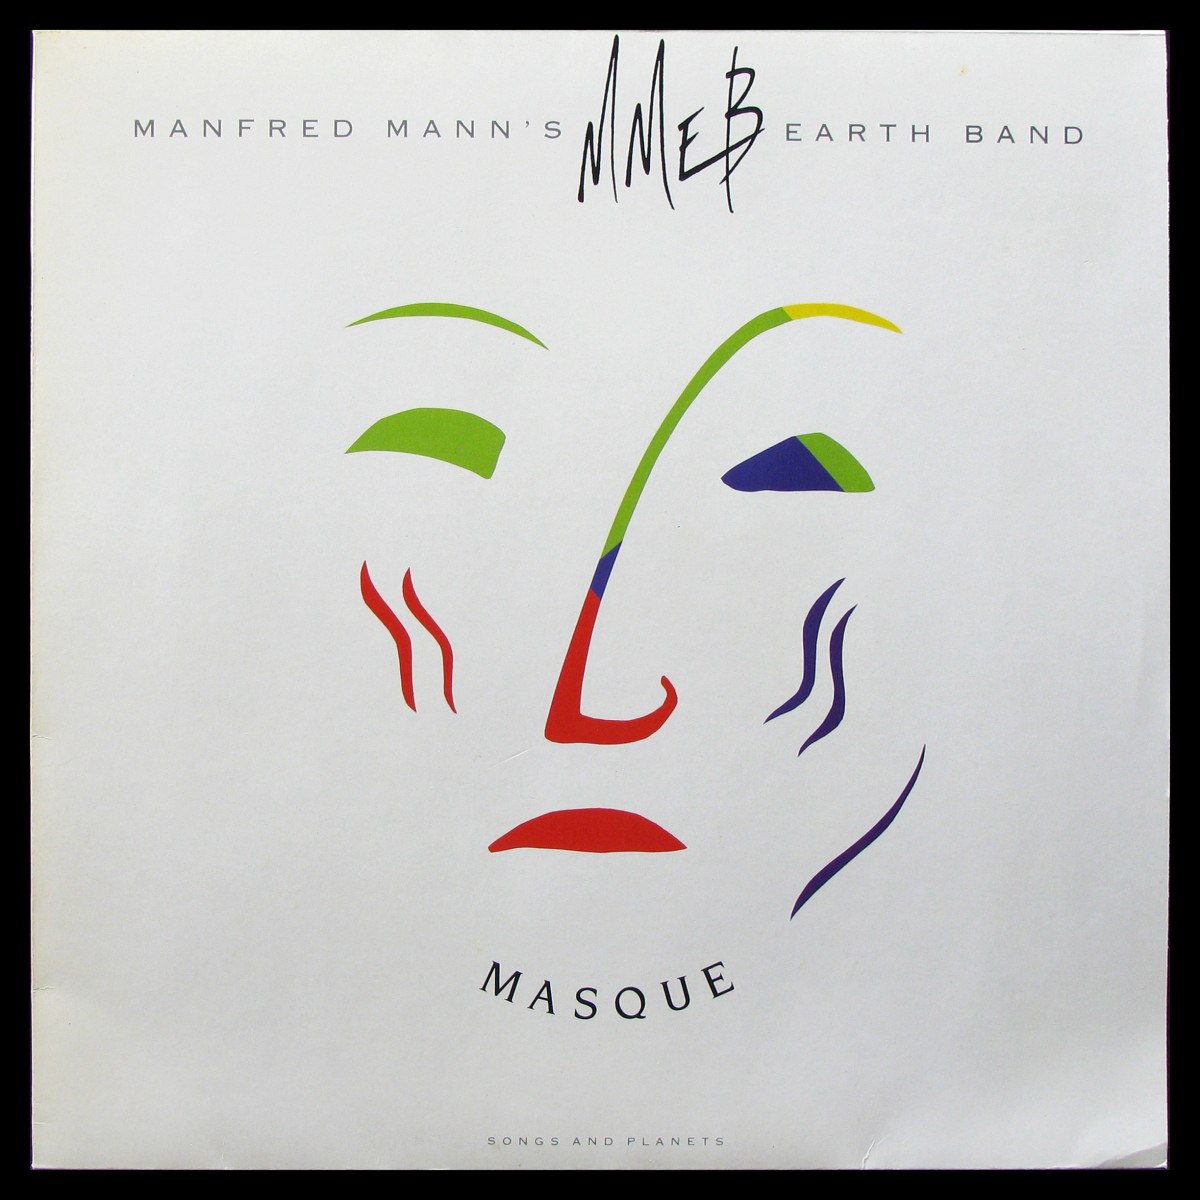 Masque (Songs And Planets)